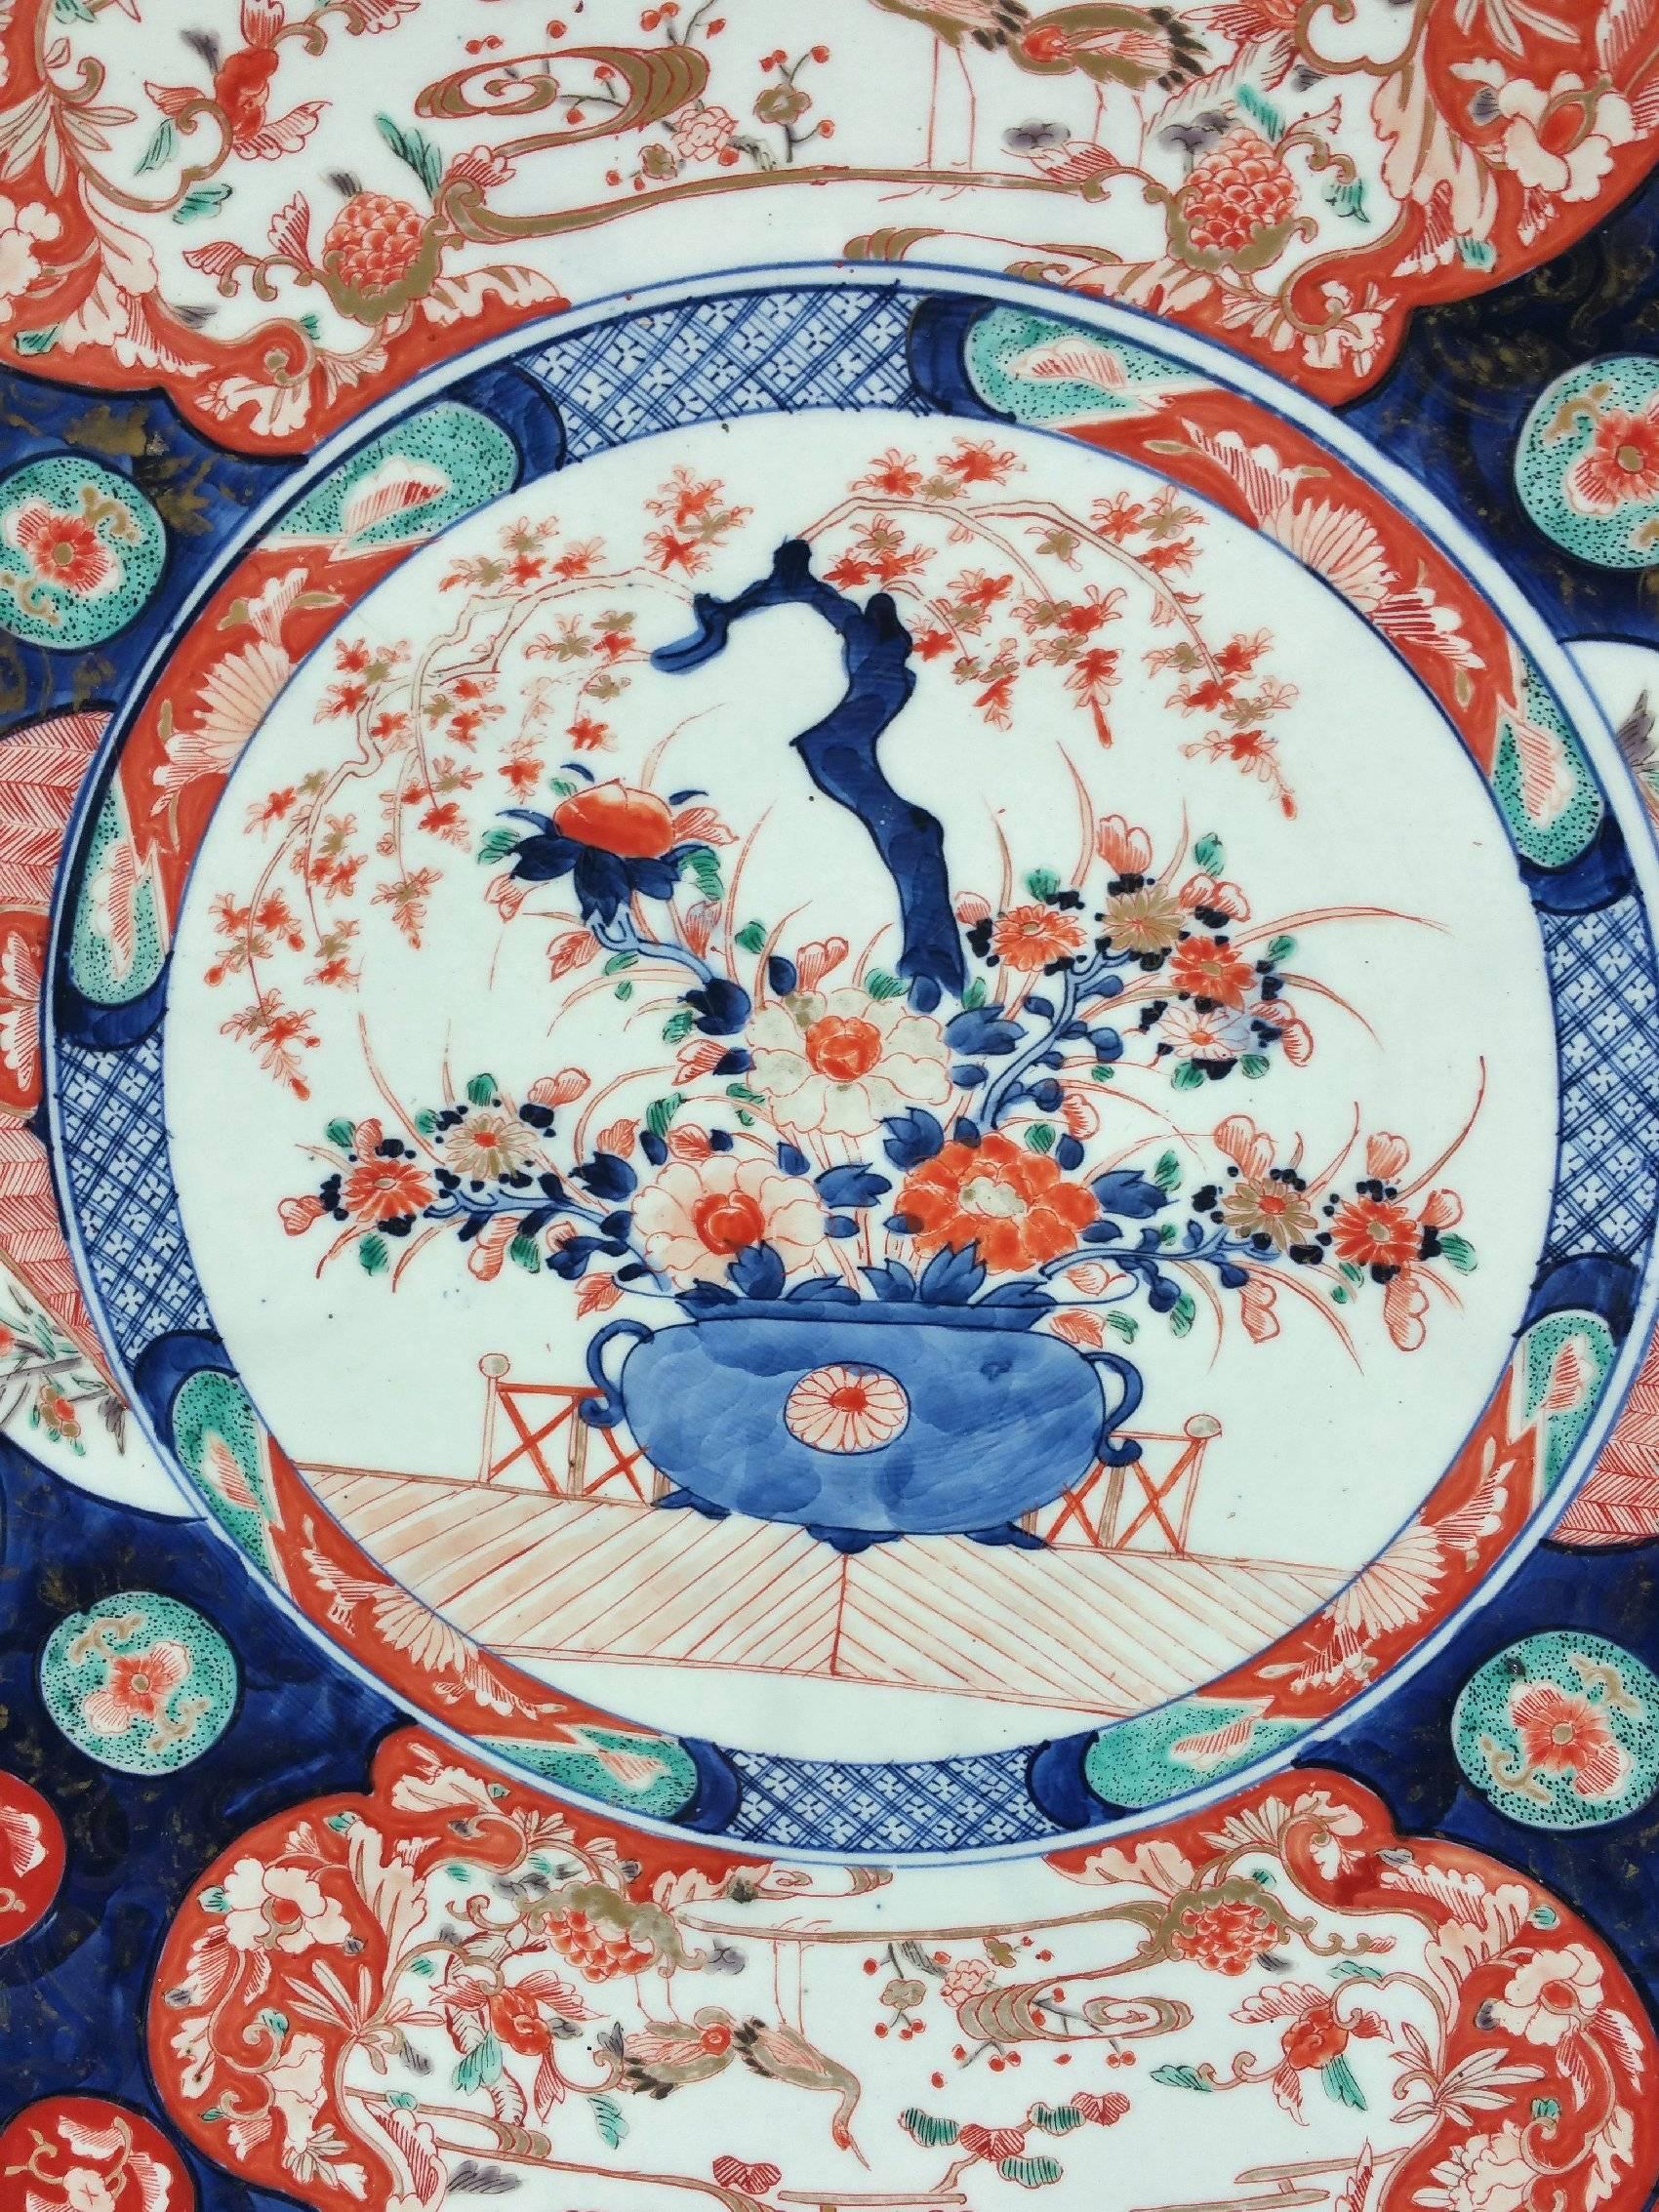 This very large and impressive 19th century Japanese Imari pottery charger plate depicts a central image of a jardinière of flowers surrounded with flora and fauna designs. The charger is of Meji period and also has an oak display stand. It